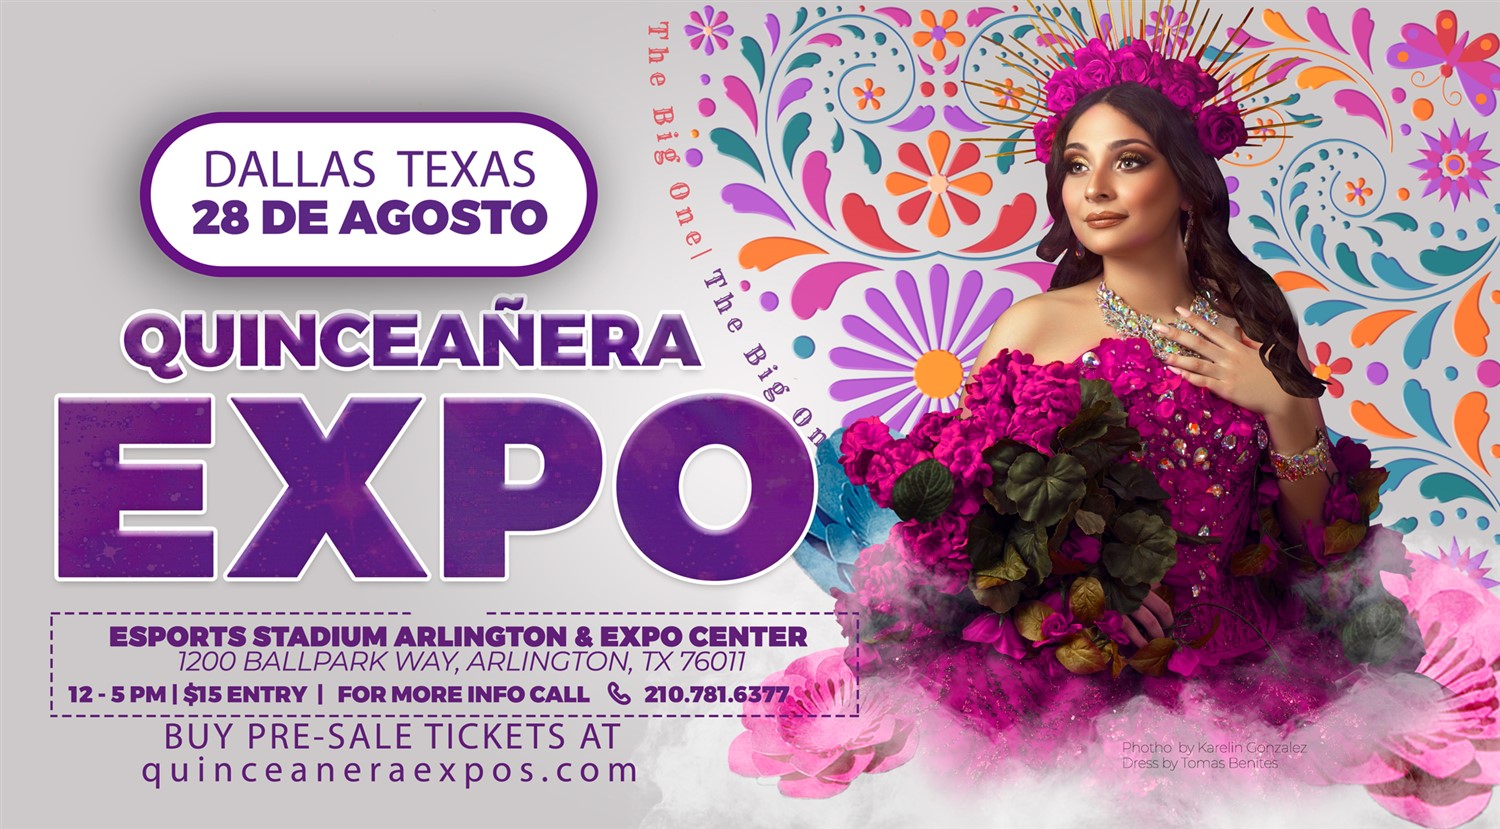 The Big One Dallas Quinceanera Expo August 28th 2022 Arlington Expo Center  on Aug 28, 12:00@Esports Stadium Arlington & Expo Center - Buy tickets and Get information on Quinceanera Expo 